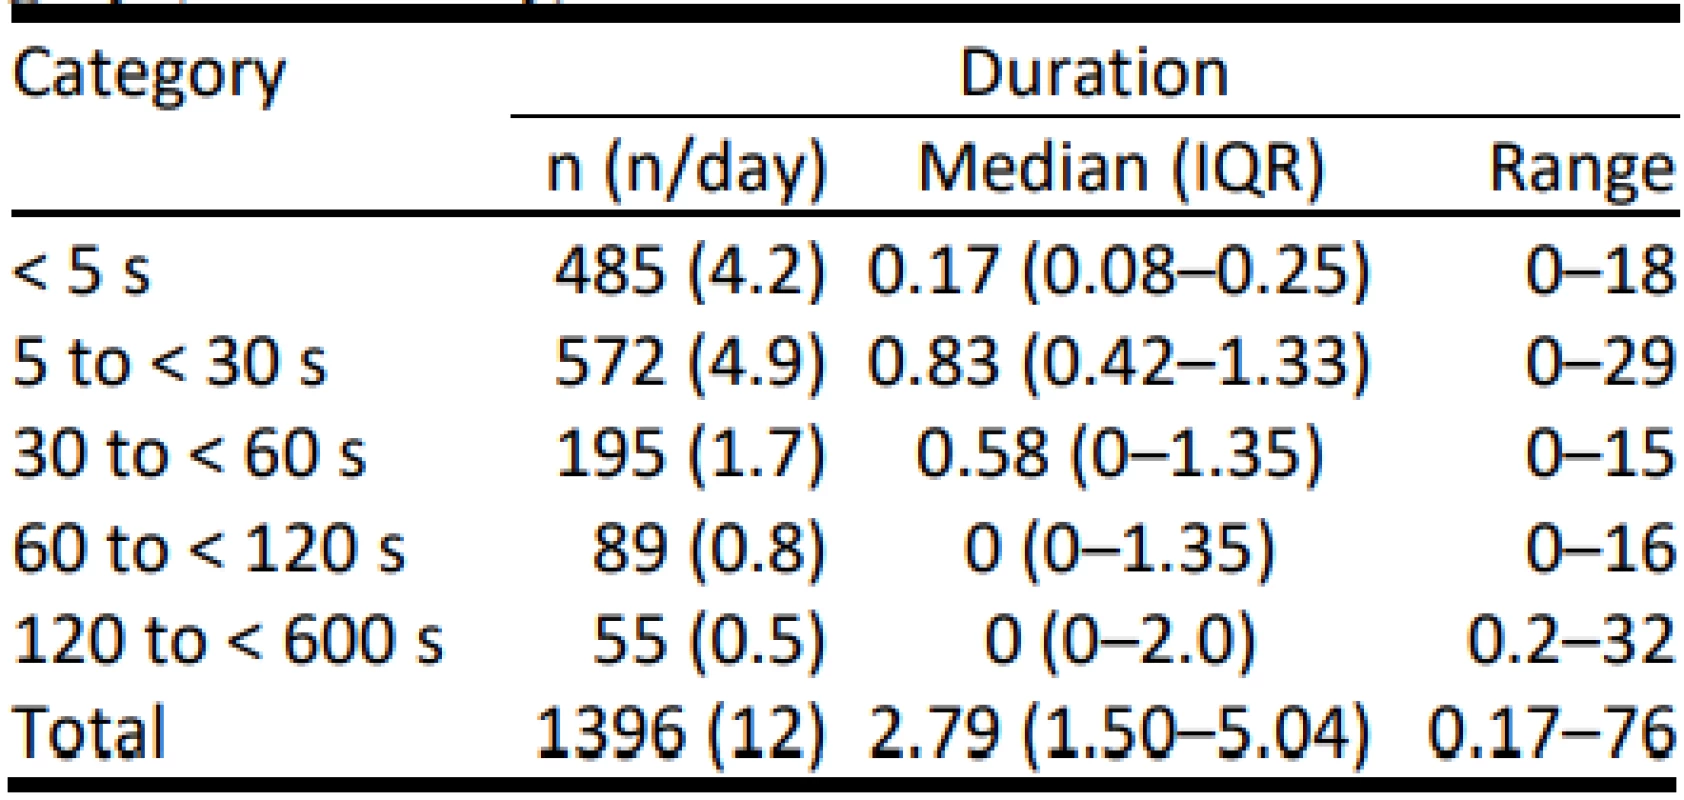 Total Drop-Out time in each duration category (minutes/day).